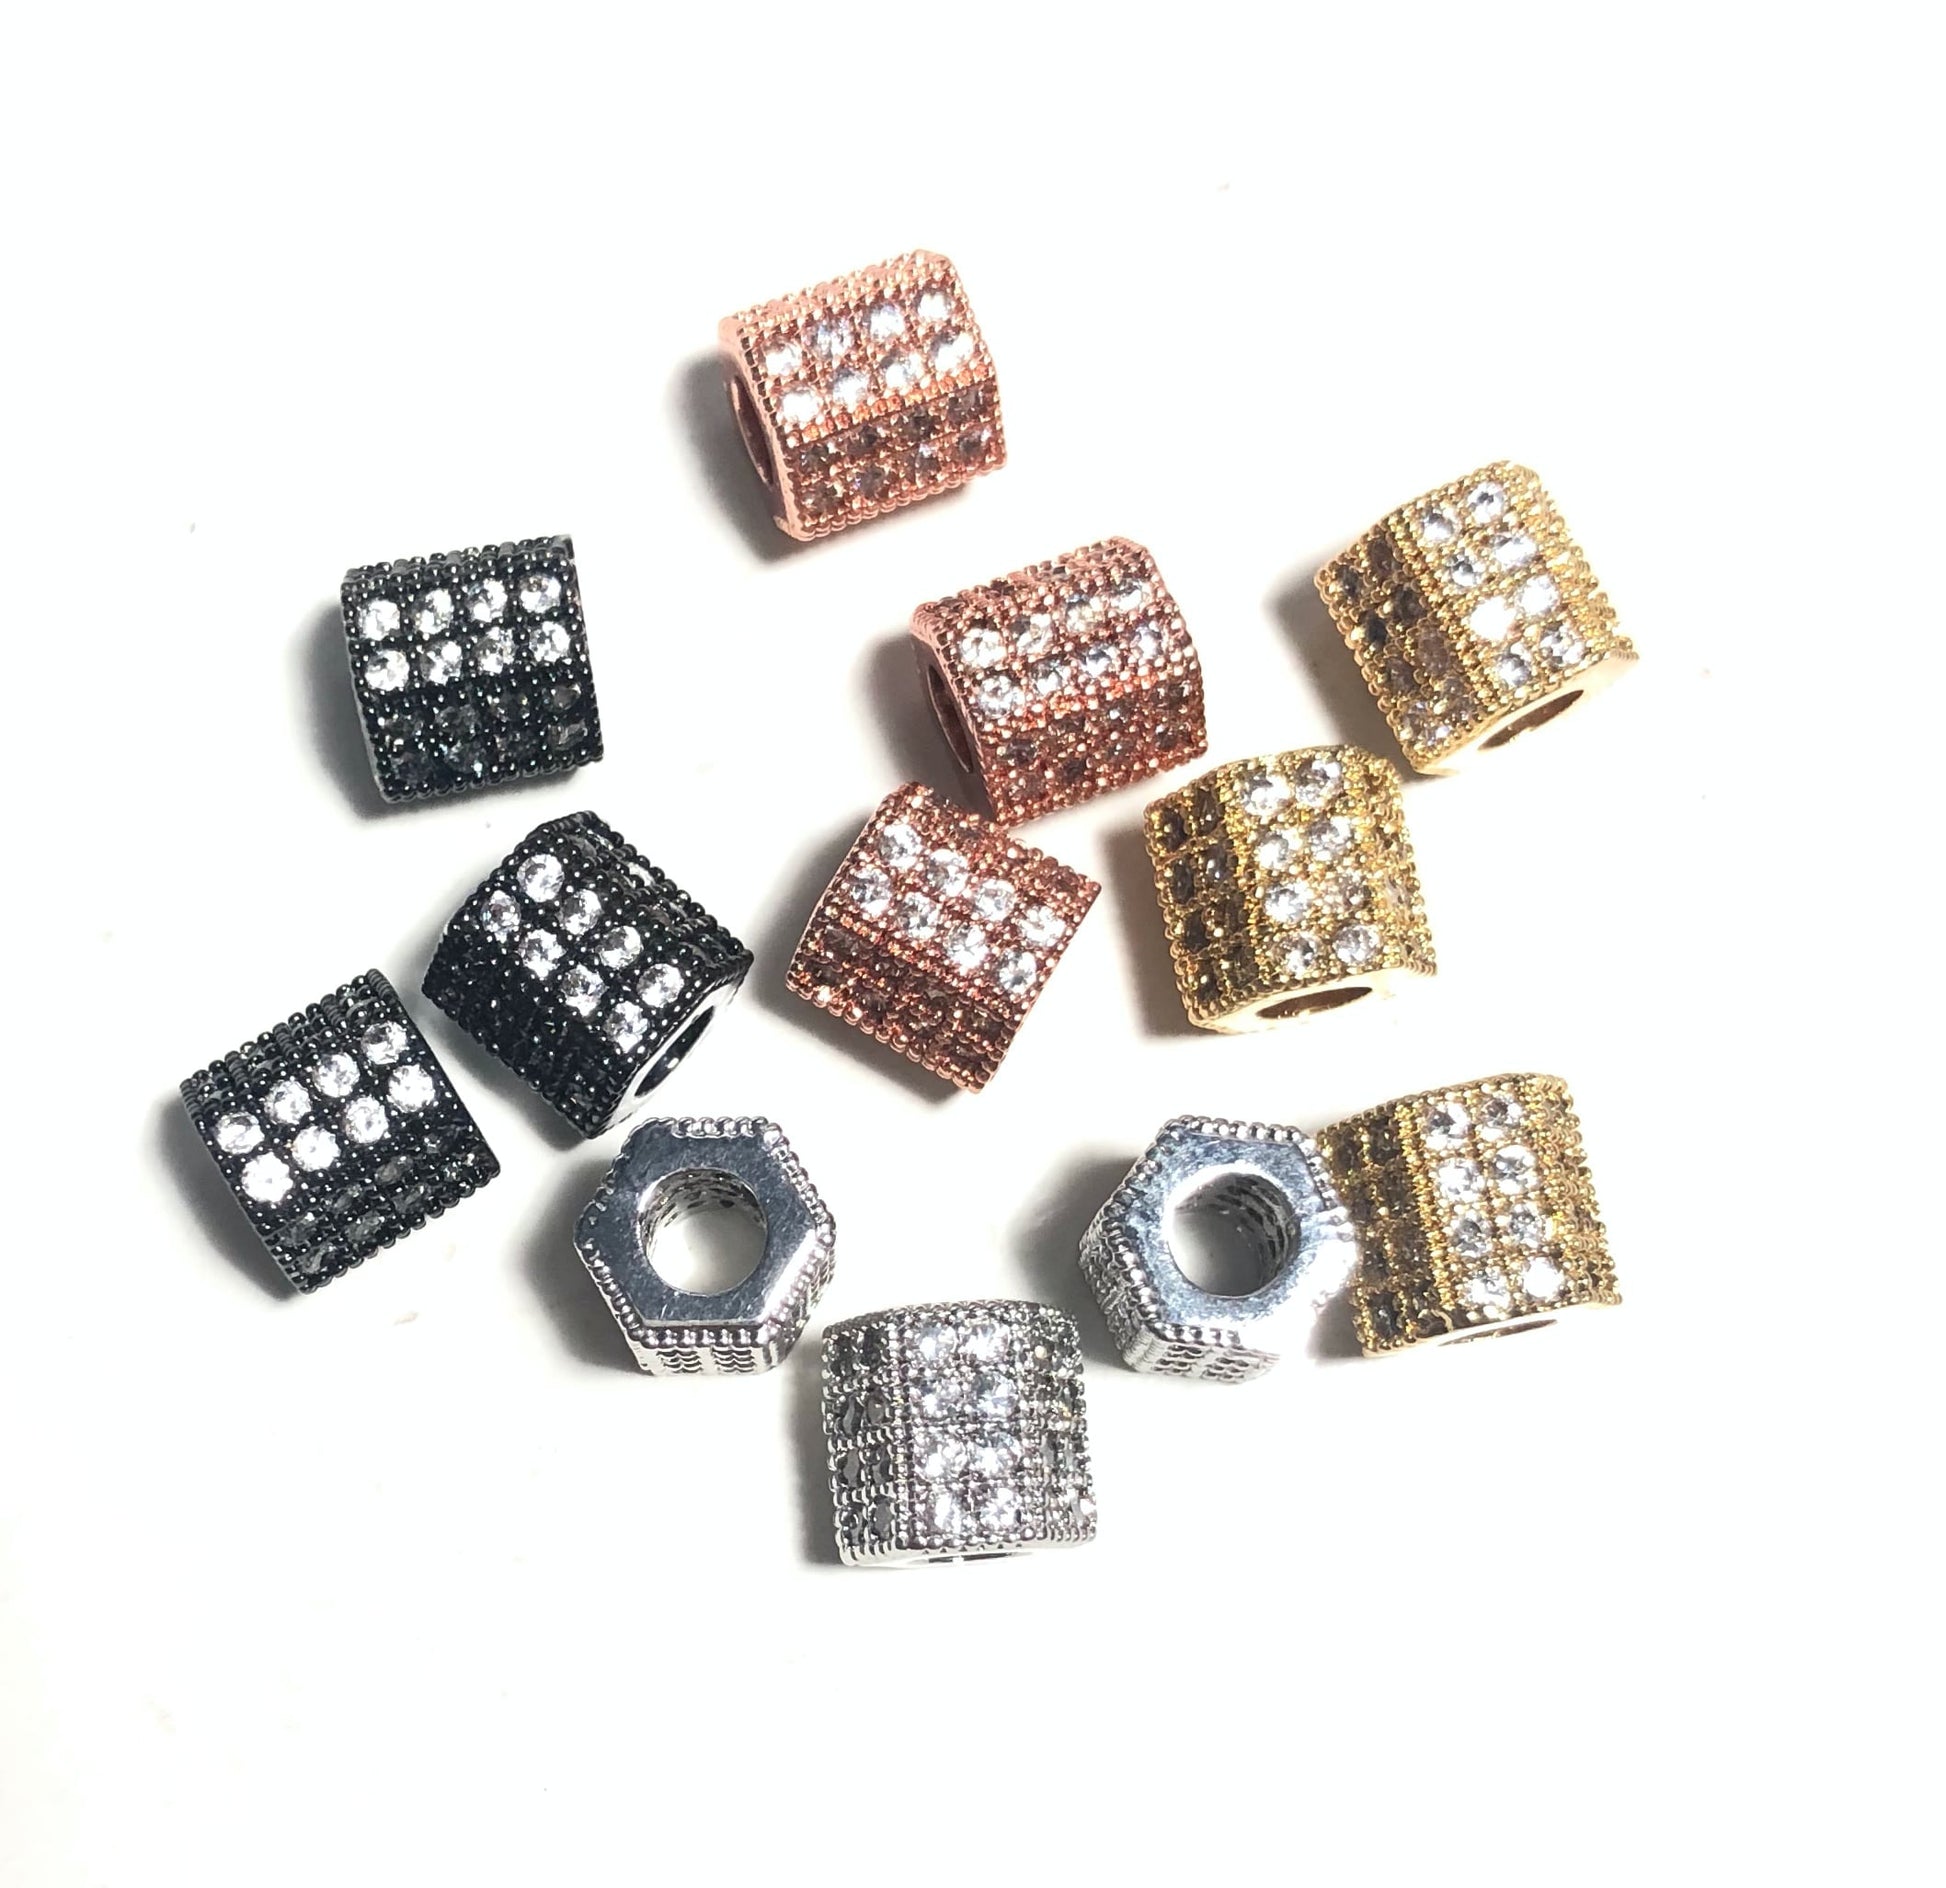 20pcs/lot 8*7mm Clear CZ Paved Hexagon Rondelle Spacers Mix Color CZ Paved Spacers Rondelle Beads Charms Beads Beyond